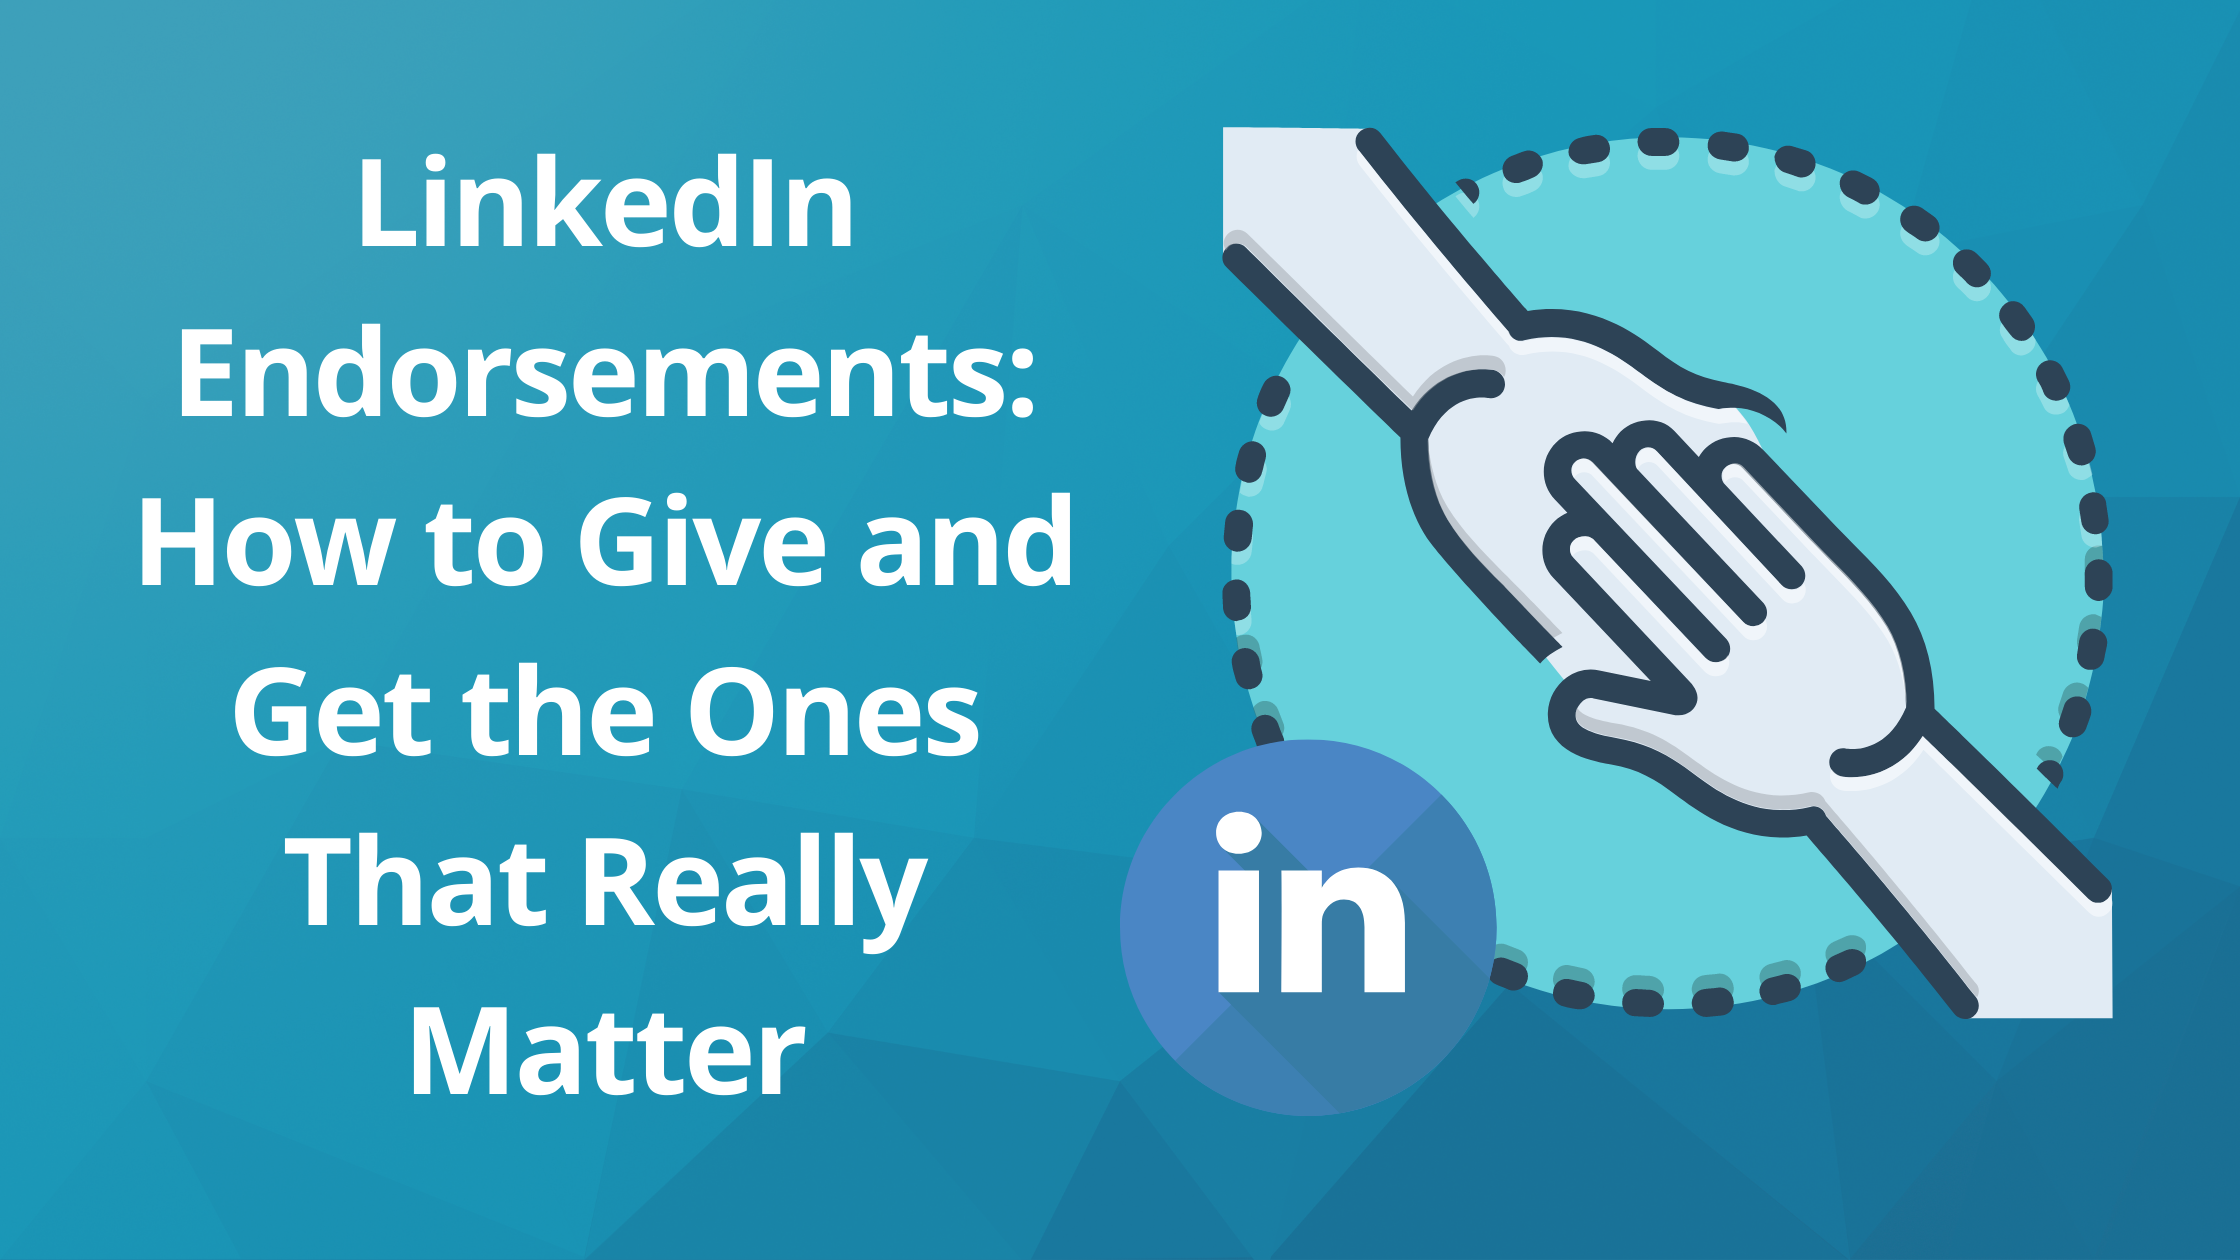 LinkedIn Endorsements: How to Give and Get the Ones That Really Matter